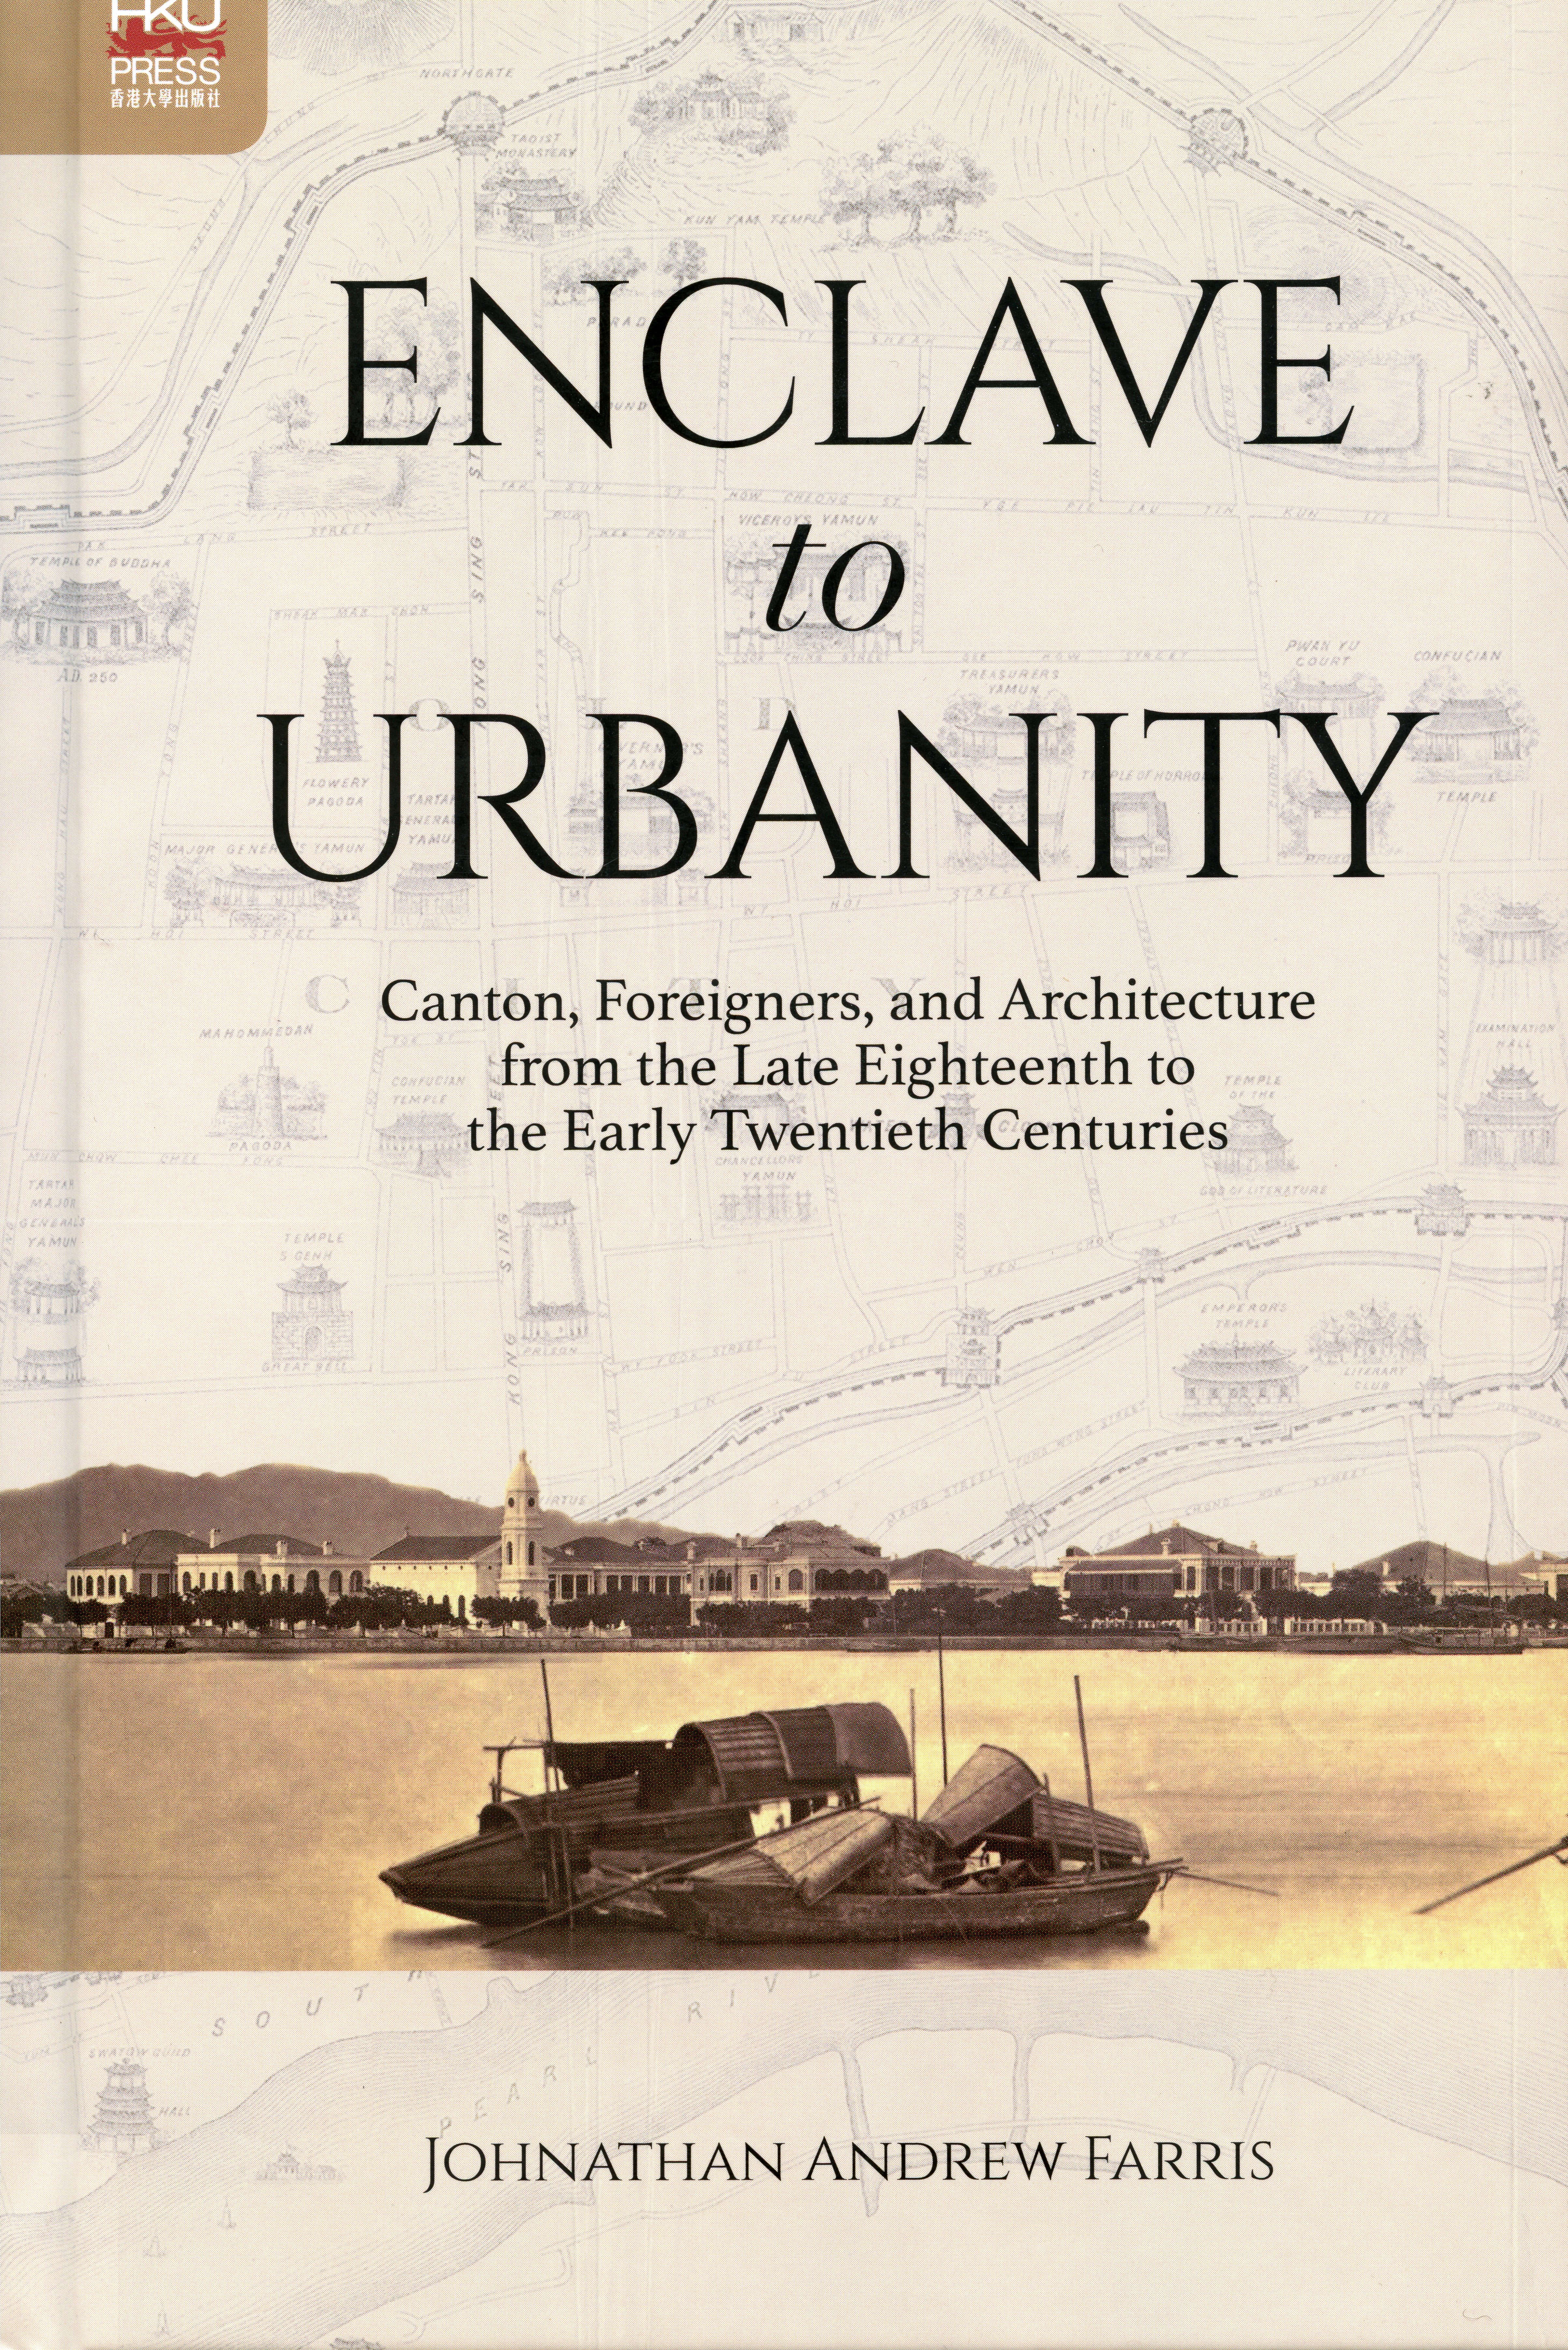 Enclave to Urbanity: Canton, Foreigners, and Architecture from the Late Eighteenth to the Early Twentieth Centuries, by Johnathan A. Farris